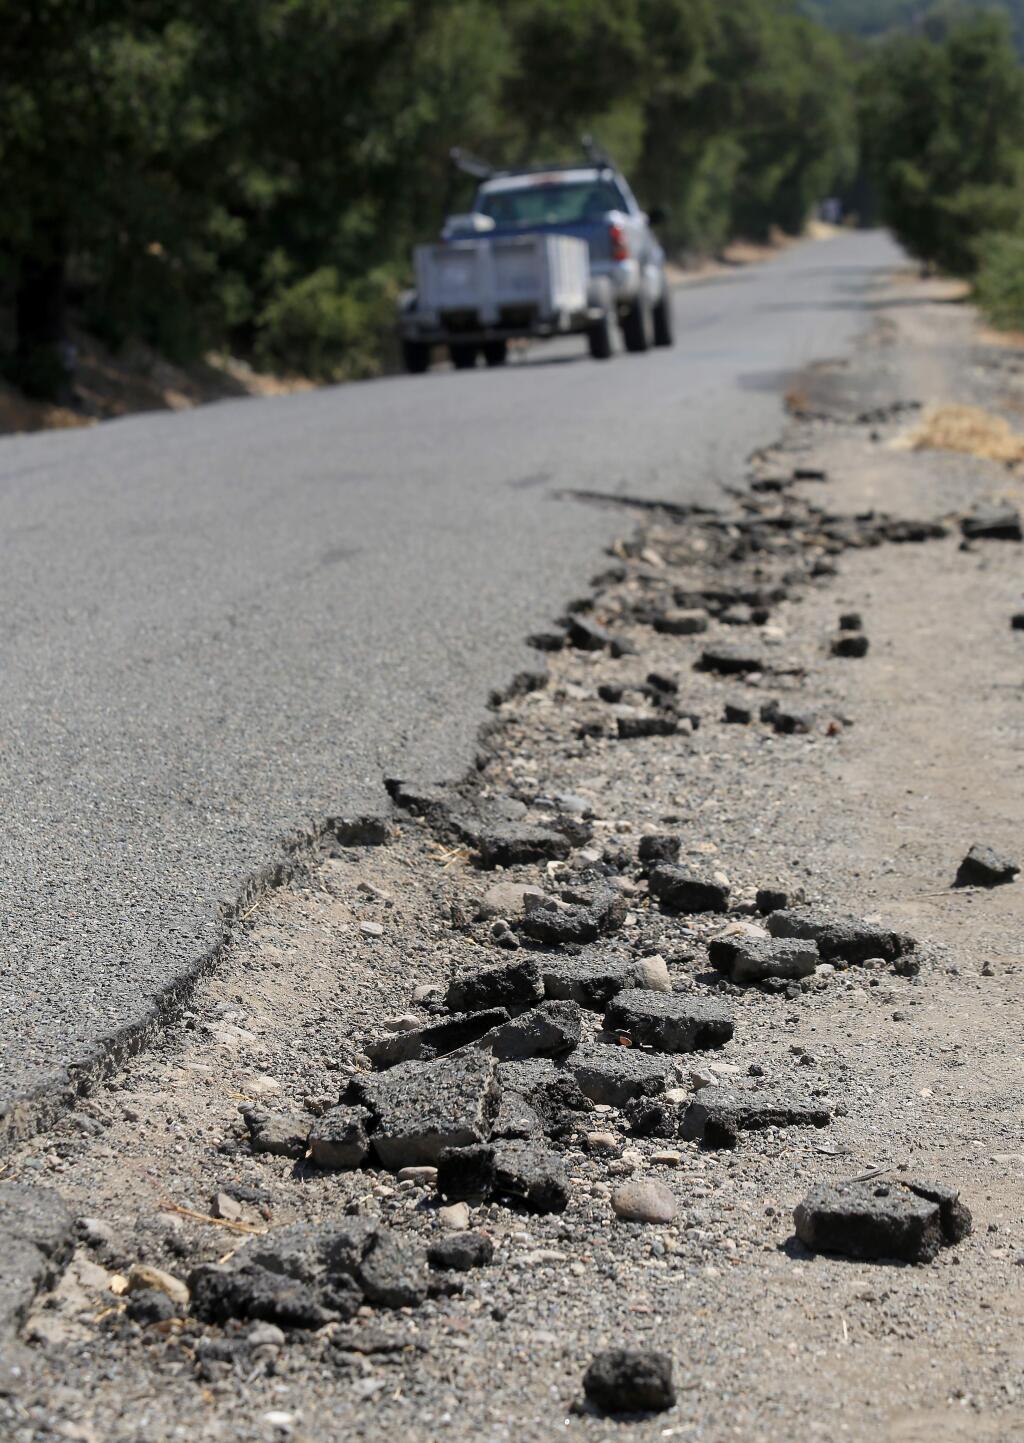 The edge of Faught Road south of Shiloh Regional Park is crumbling in numerous locations. The road, once a less used country road, is now heavily traveled and used as scenic alternative to Old Redwood Highway through Windsor. (Kent Porter / Press Democrat) 2014